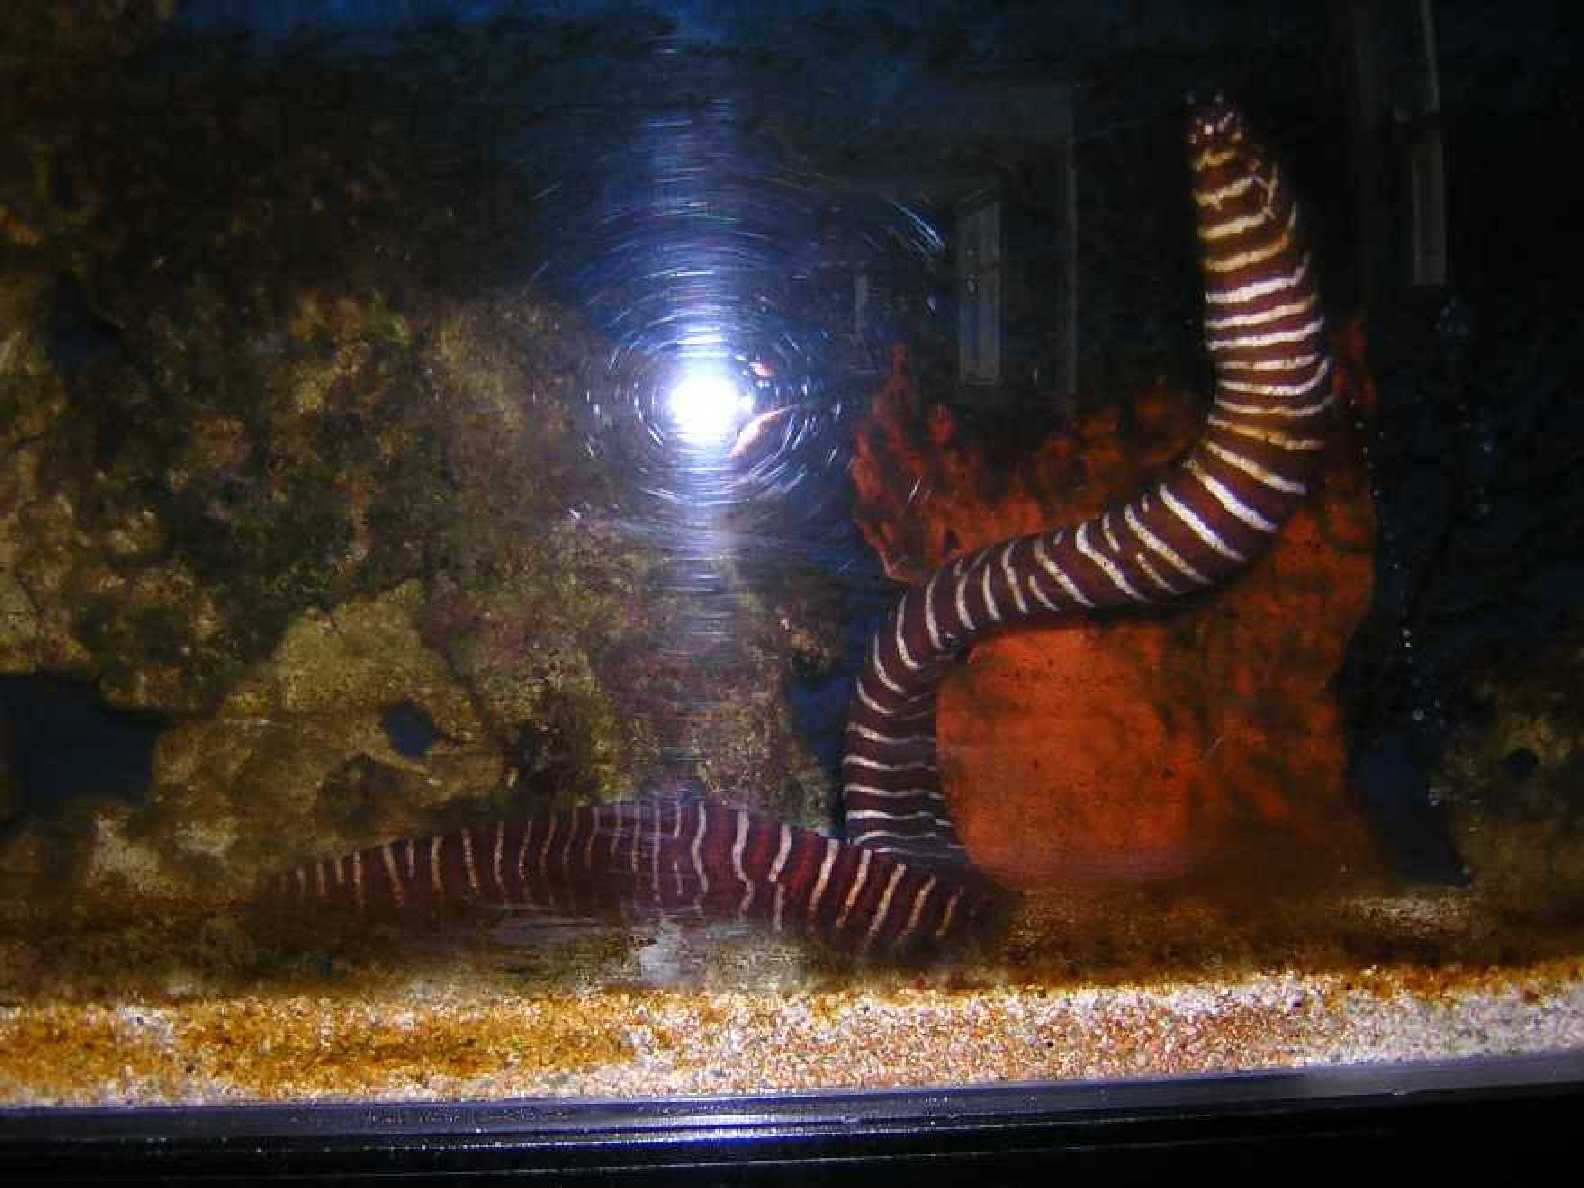 This is the large Eel from the abandoned aquarium.  Any ideas what kind it is?